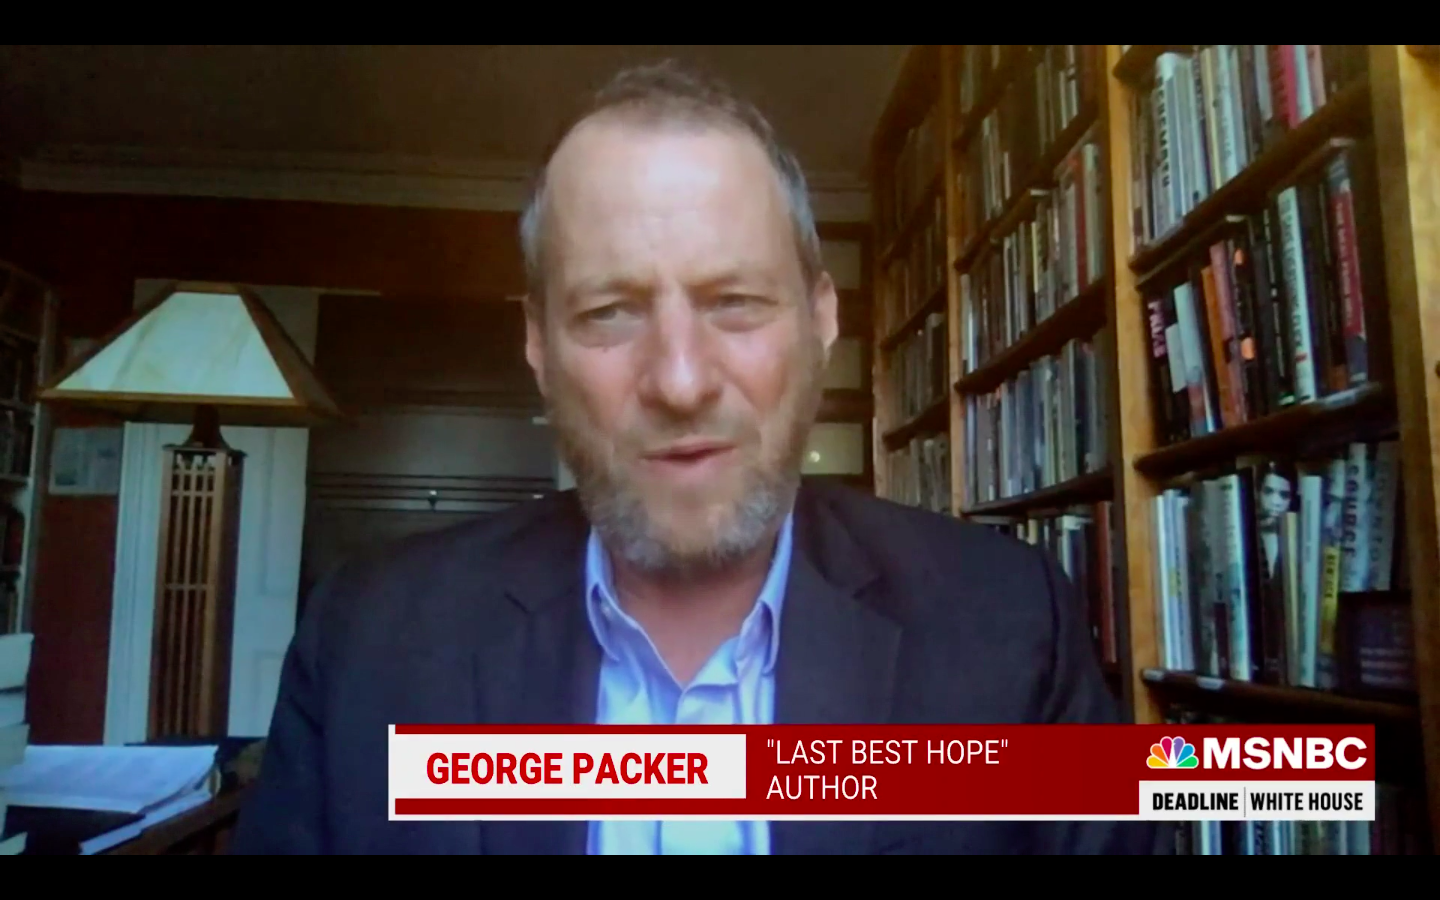 George Packer on MSNBC with Nicole Wallace